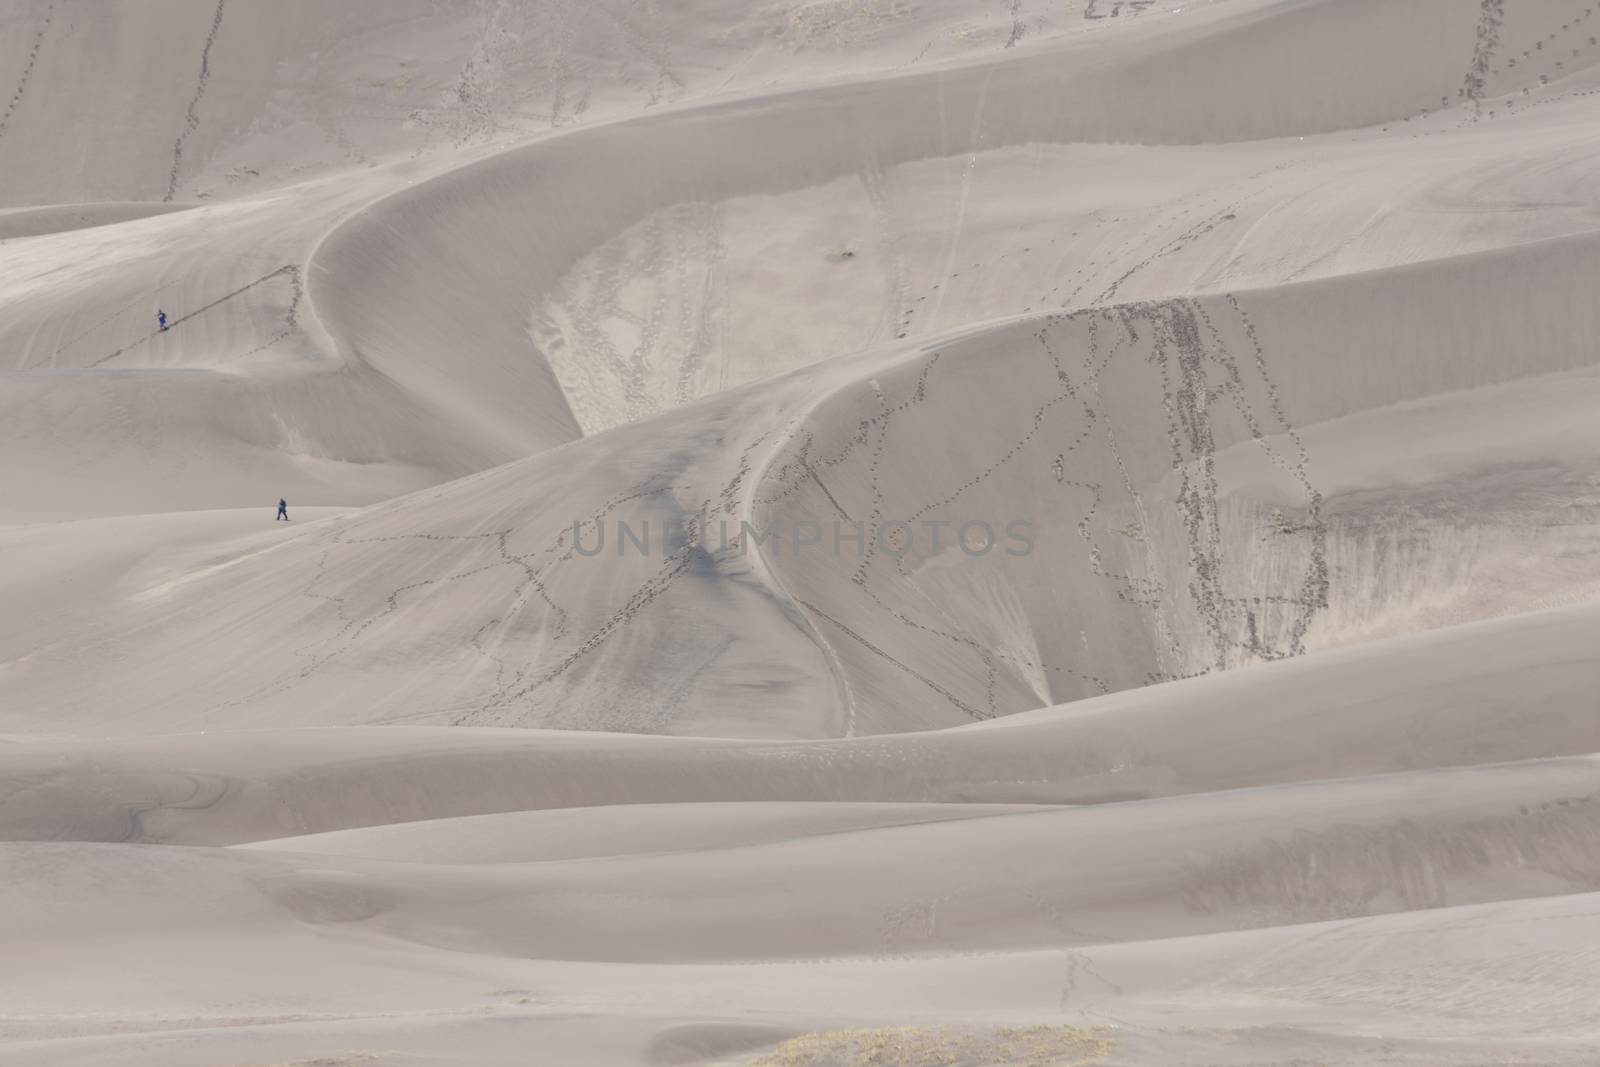 Swirling ridges and patterns of sand create the tourist attraction of the tallest dunes in North America at Great Sand Dunes National Park and Preserve in Colorado's San Luis Valley.  Date is May 27, 2016. 